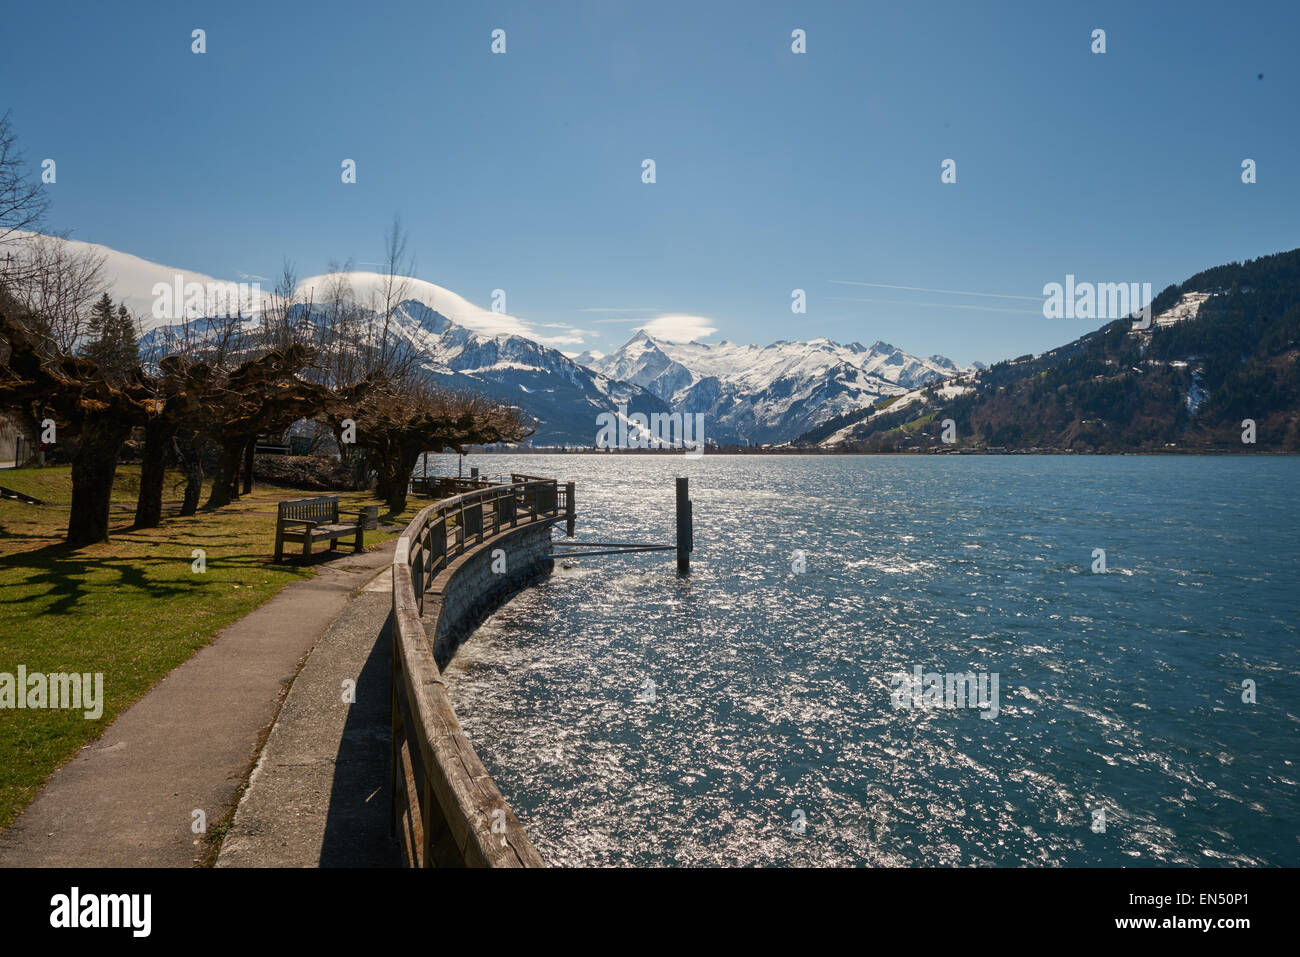 On the Lake side of the lake Zell Austria in the Alps. in the backdrop snow covered alps Stock Photo